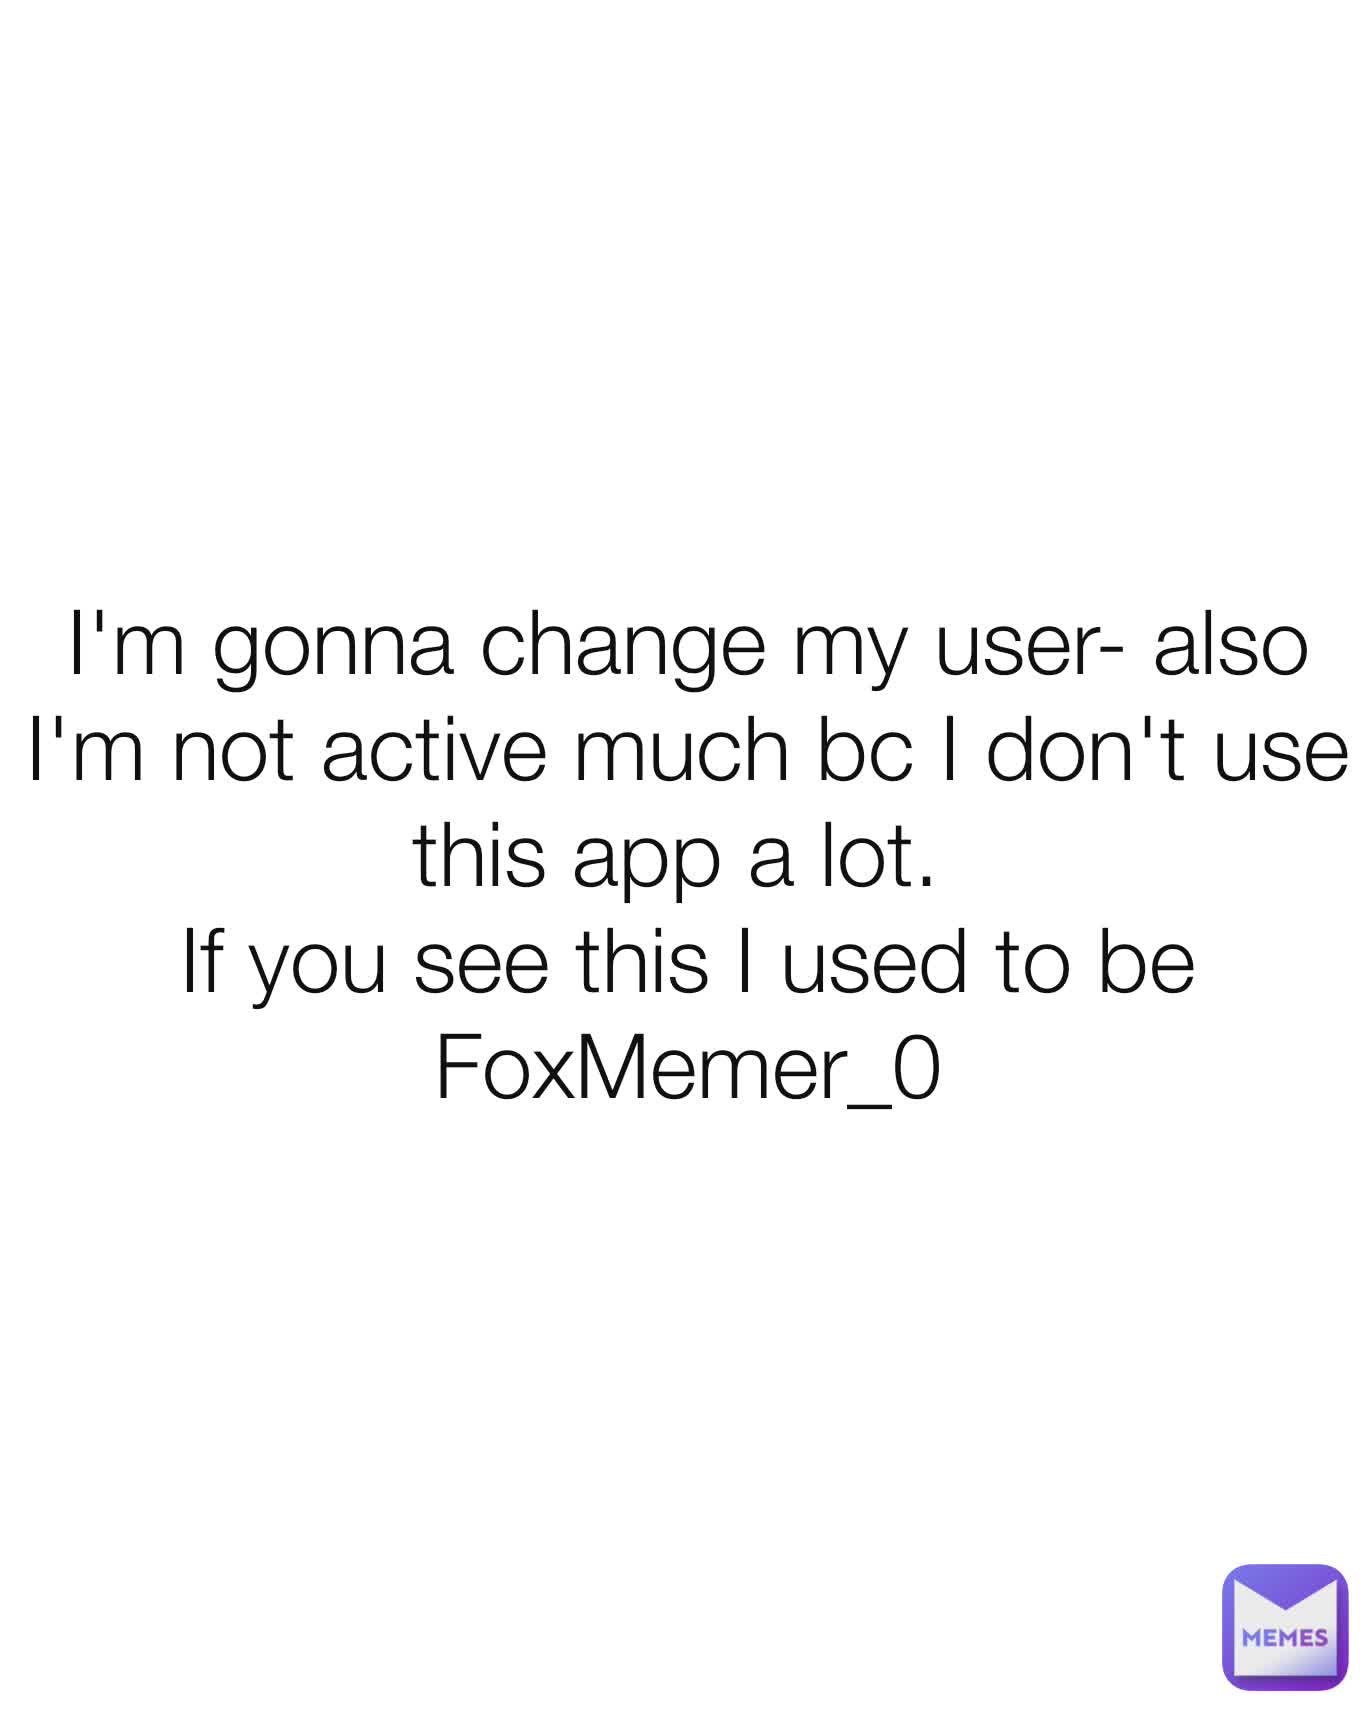 I'm gonna change my user- also I'm not active much bc I don't use this app a lot. 
If you see this I used to be  FoxMemer_0